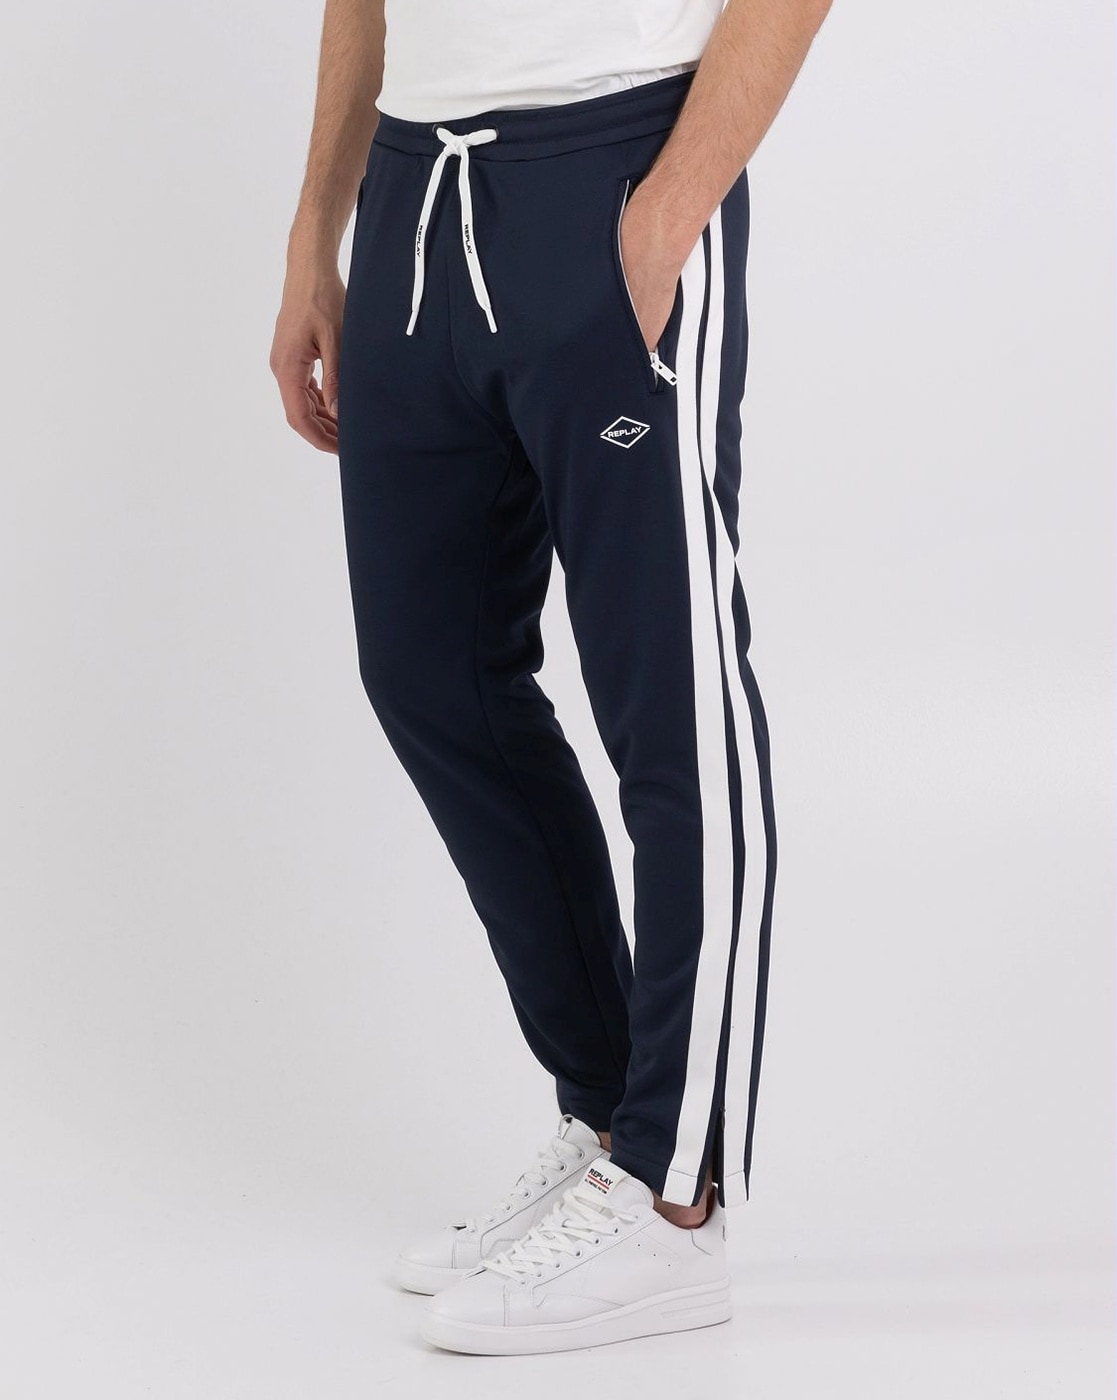 Buy Black Track Pants for Men by GAS Online | Ajio.com